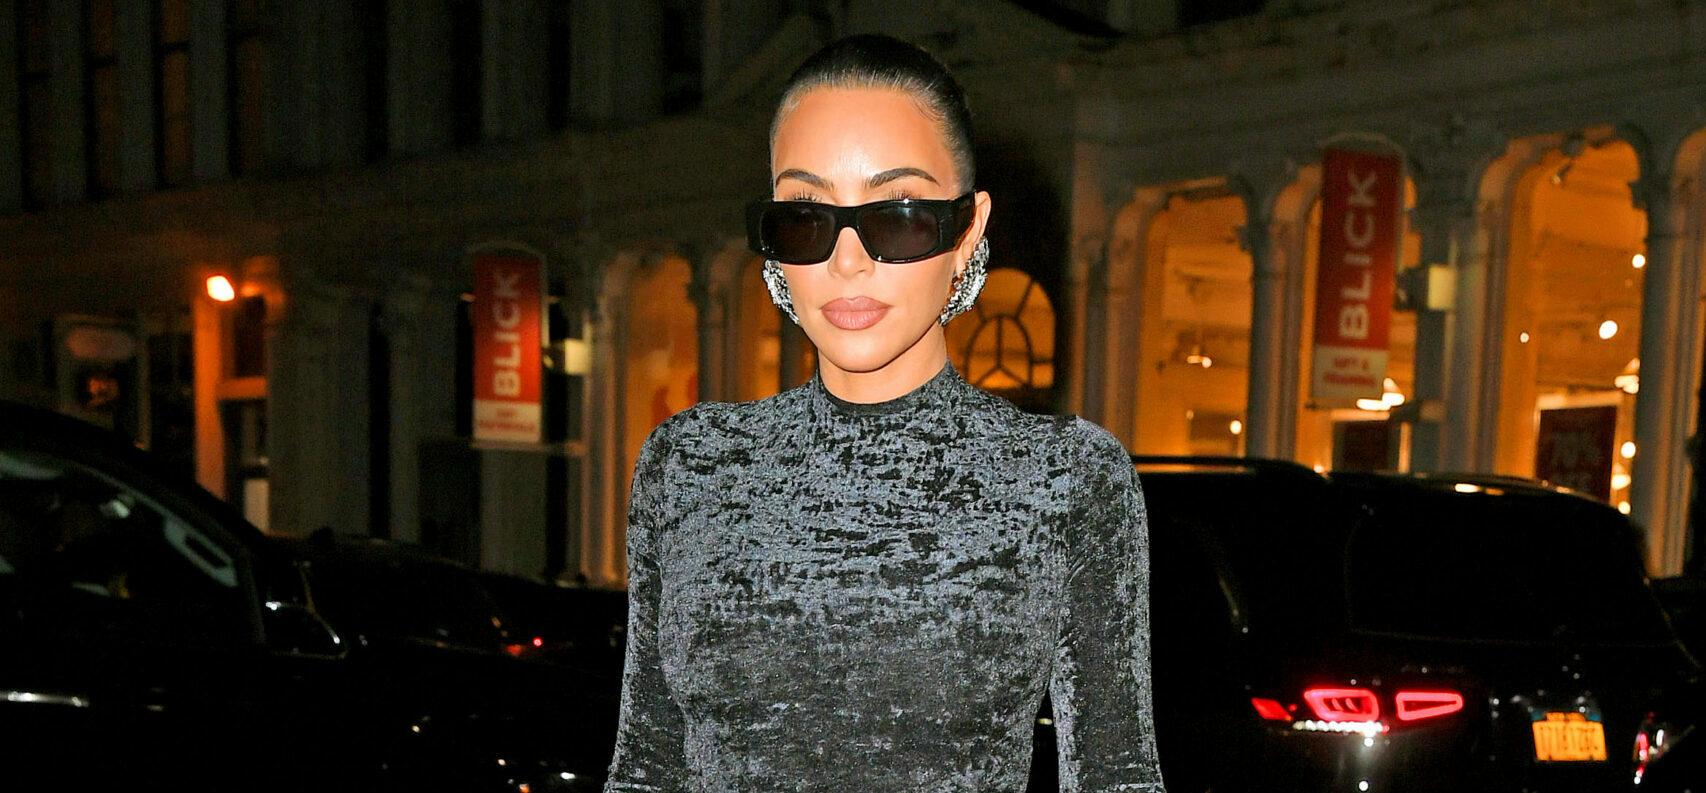 Kim Kardashian shows off her famous curves in a black dress